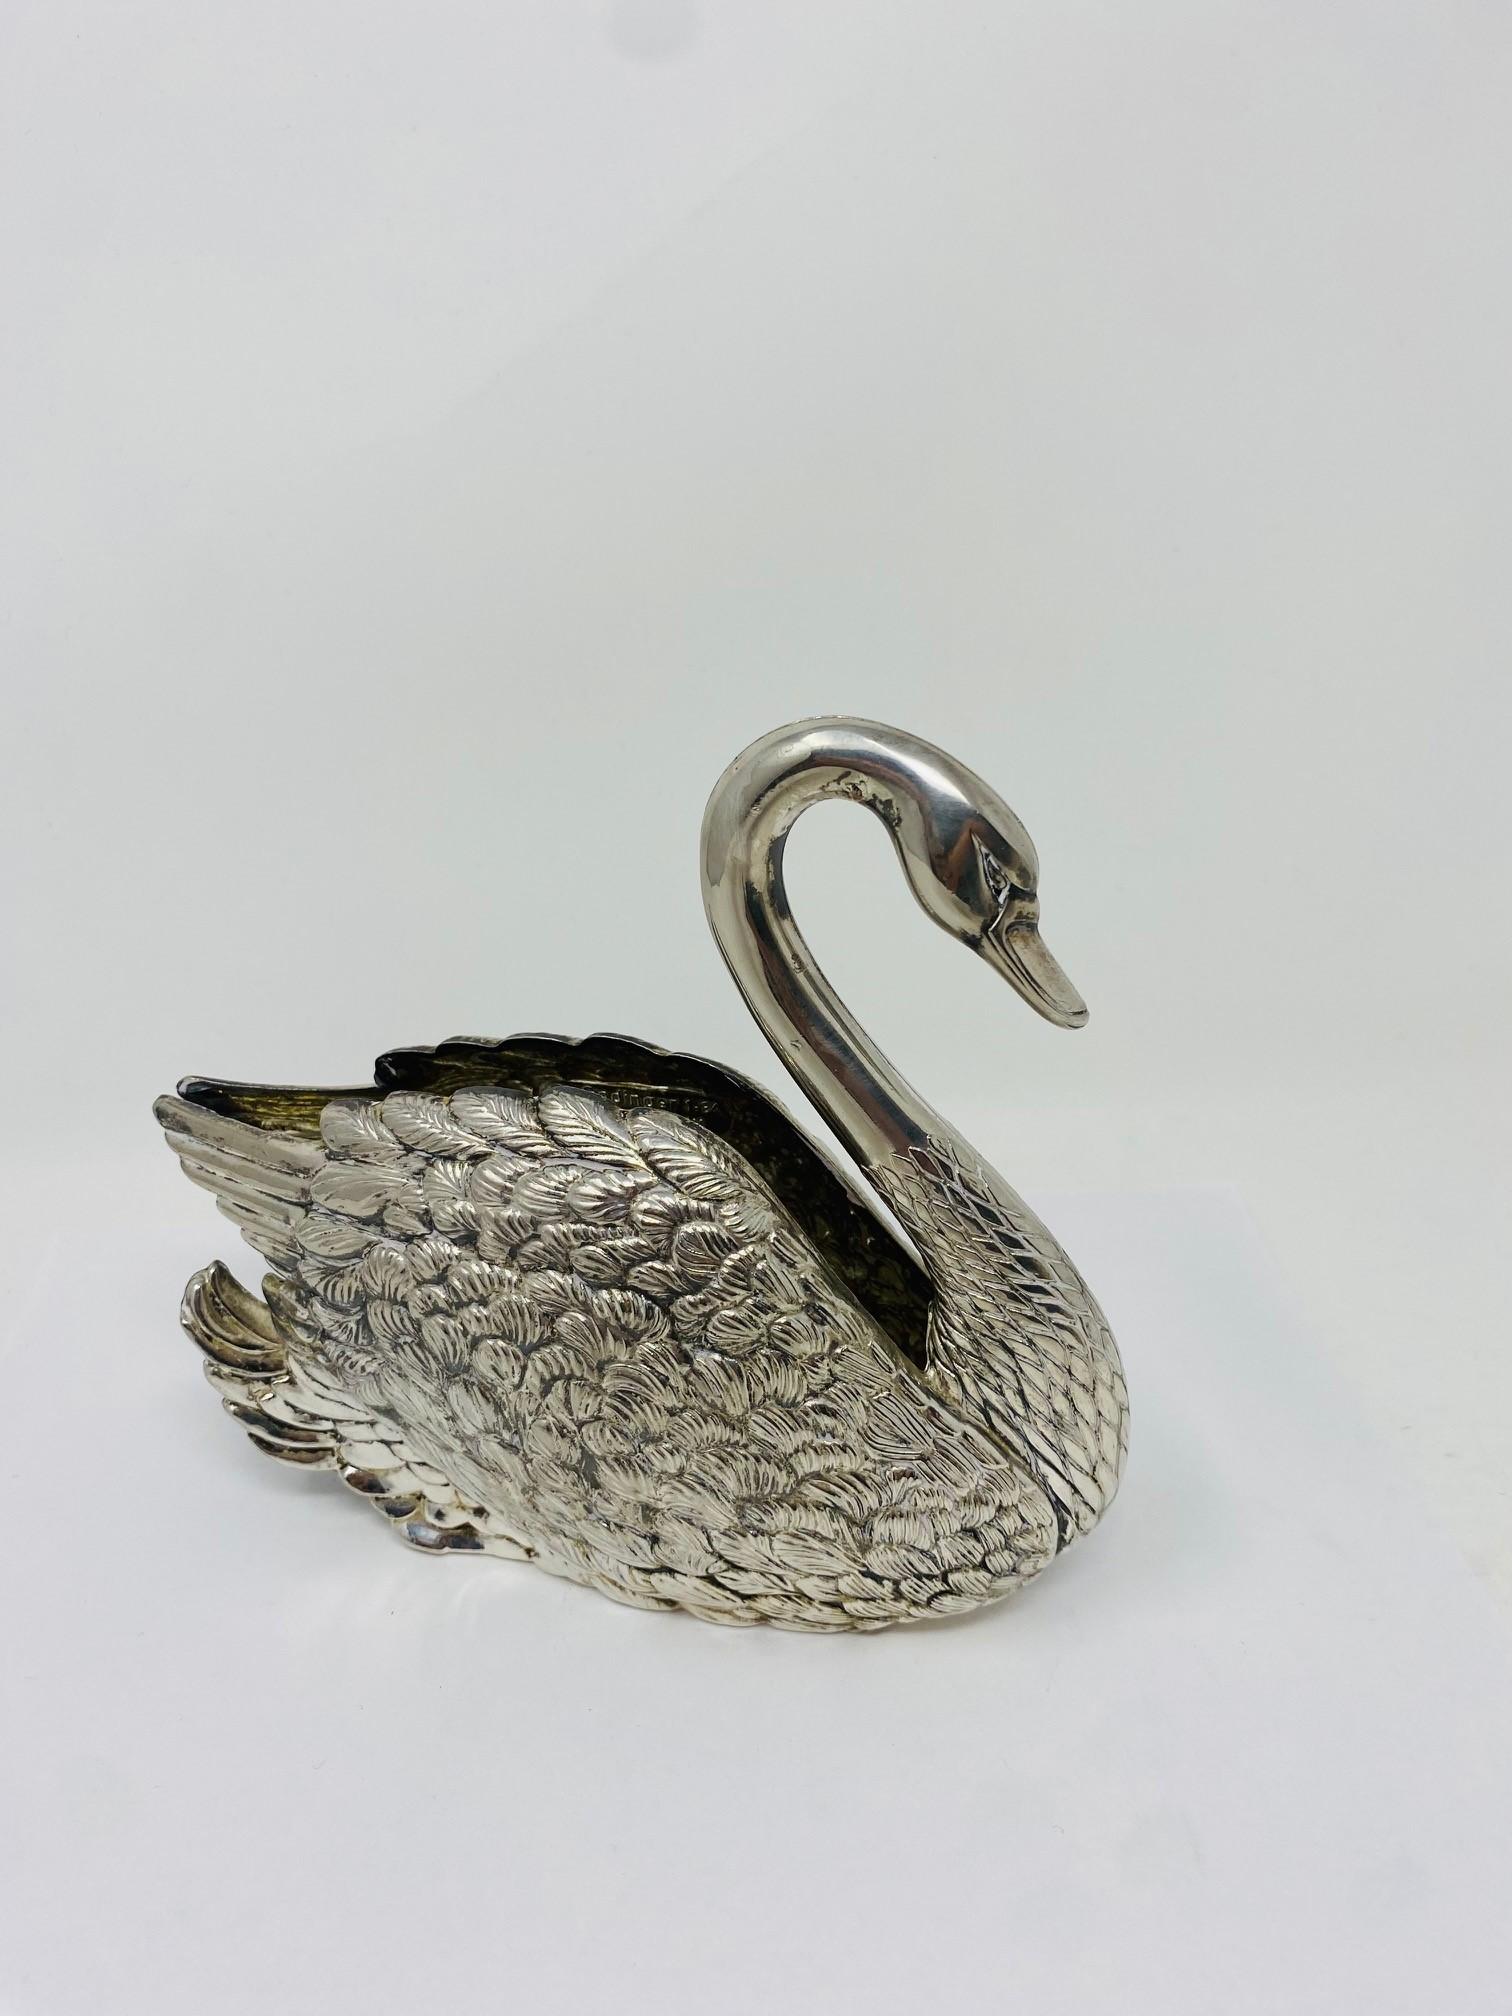 Vintage Godinger Silver Plated Swan Letter Holder Made in Italy In Good Condition For Sale In San Diego, CA